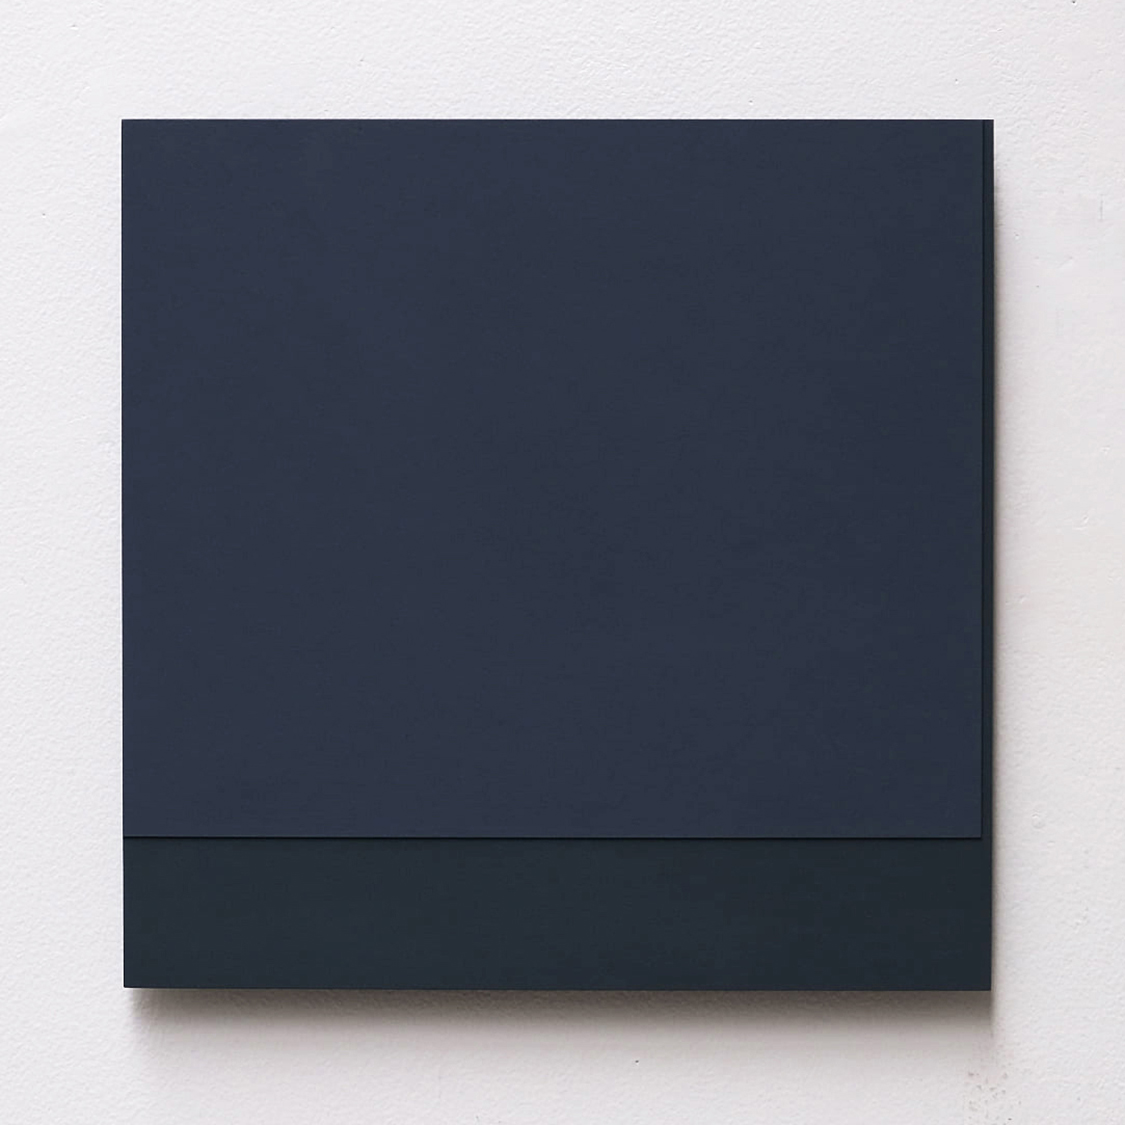 TS2204<br>Gesso on panel, 30 x 30 cm, 2022